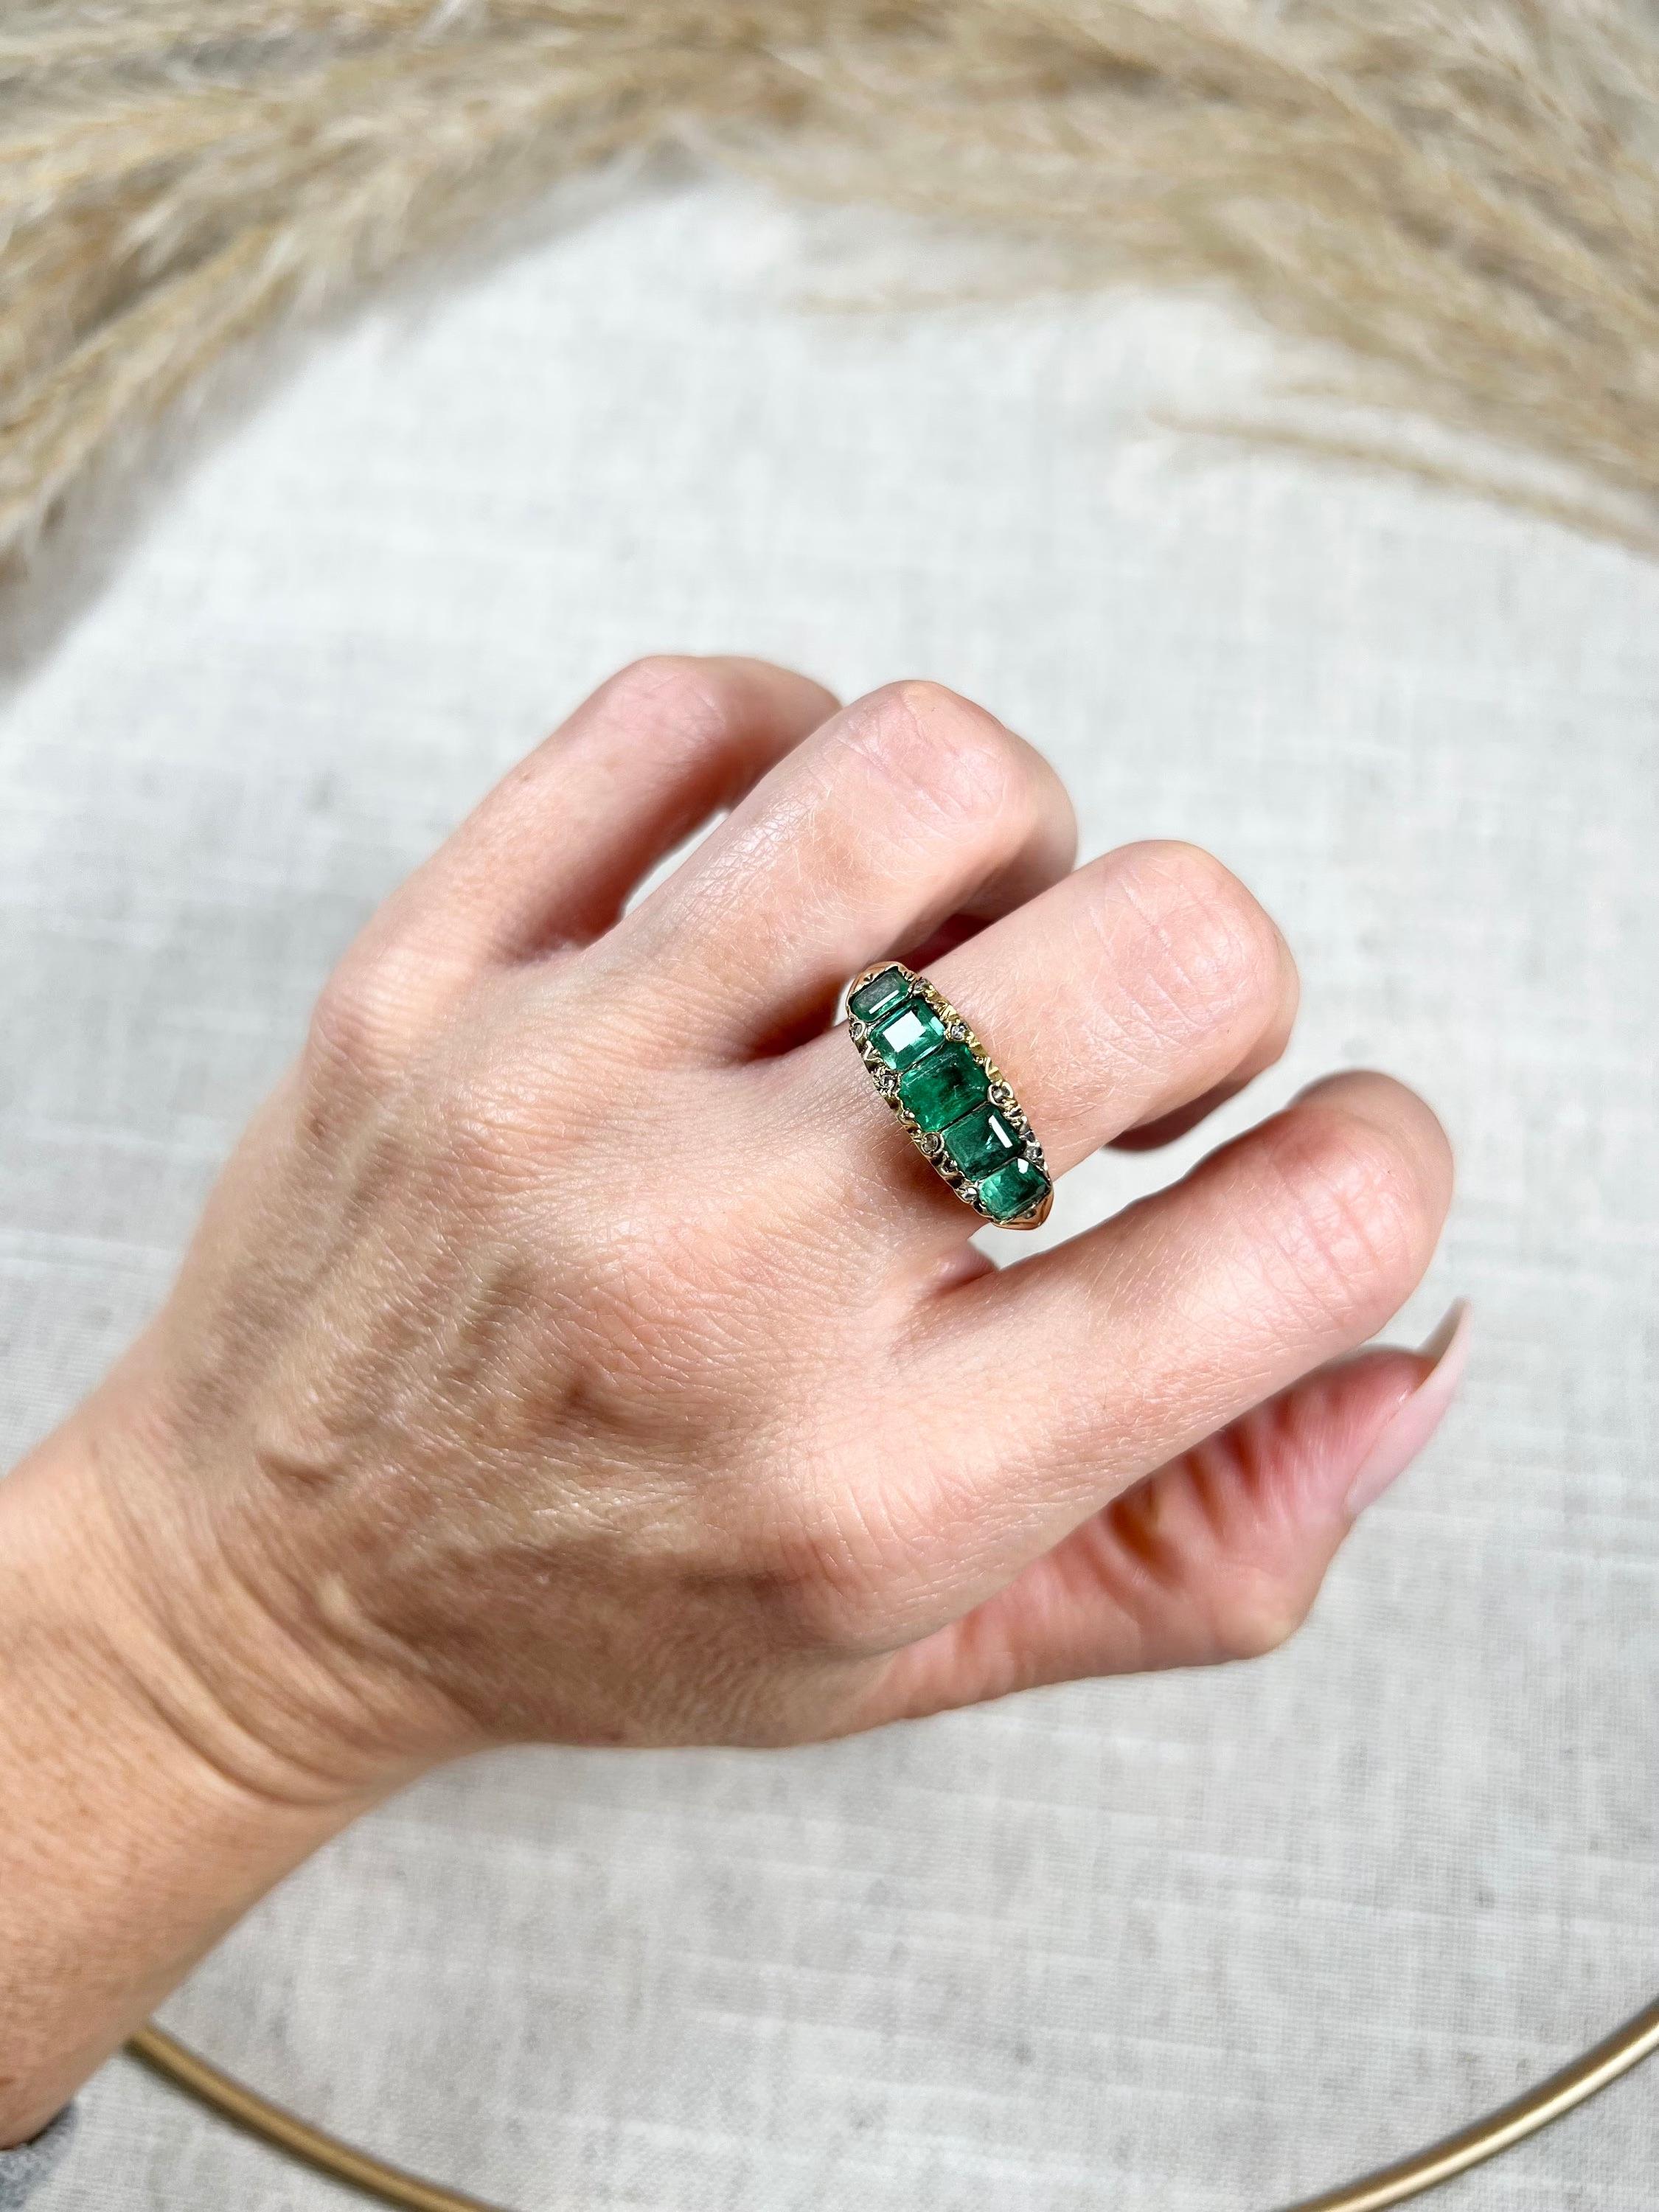 Antique Emerald Ring 

18ct Gold Tested 

Circa 1870s

This stunning Victorian-era ring features five beautiful natural emeralds set in an 18ct gold carved setting, with sparkling diamonds accents. Dating back to the 1800s, this piece showcases the